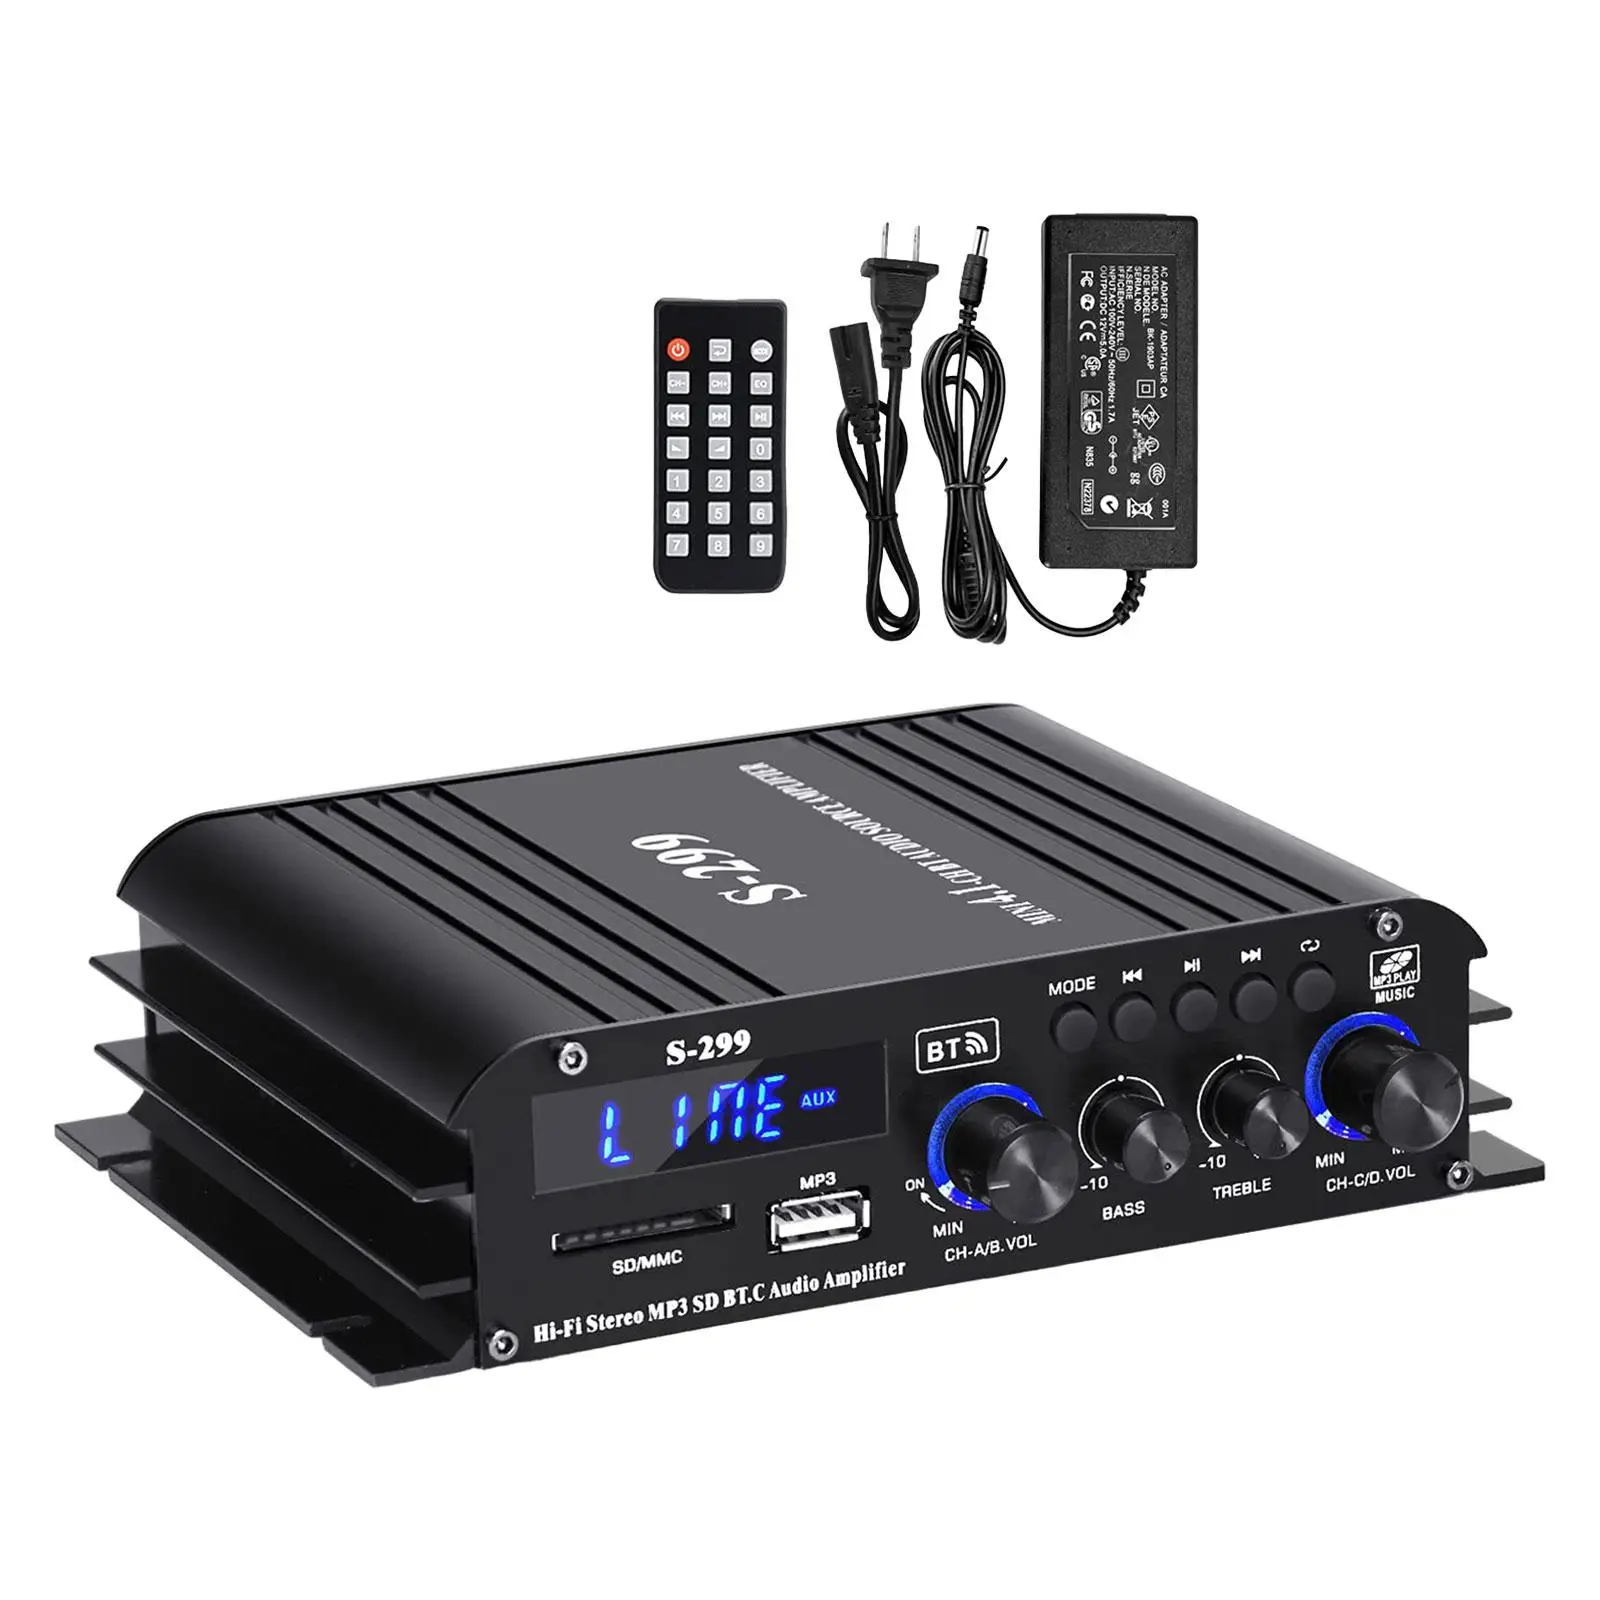 Audio Power Amplifier for Store Home Theater 4.1 Channel Portable Mini HiFi Stereo Amp Volume Adjustment with Remote Control